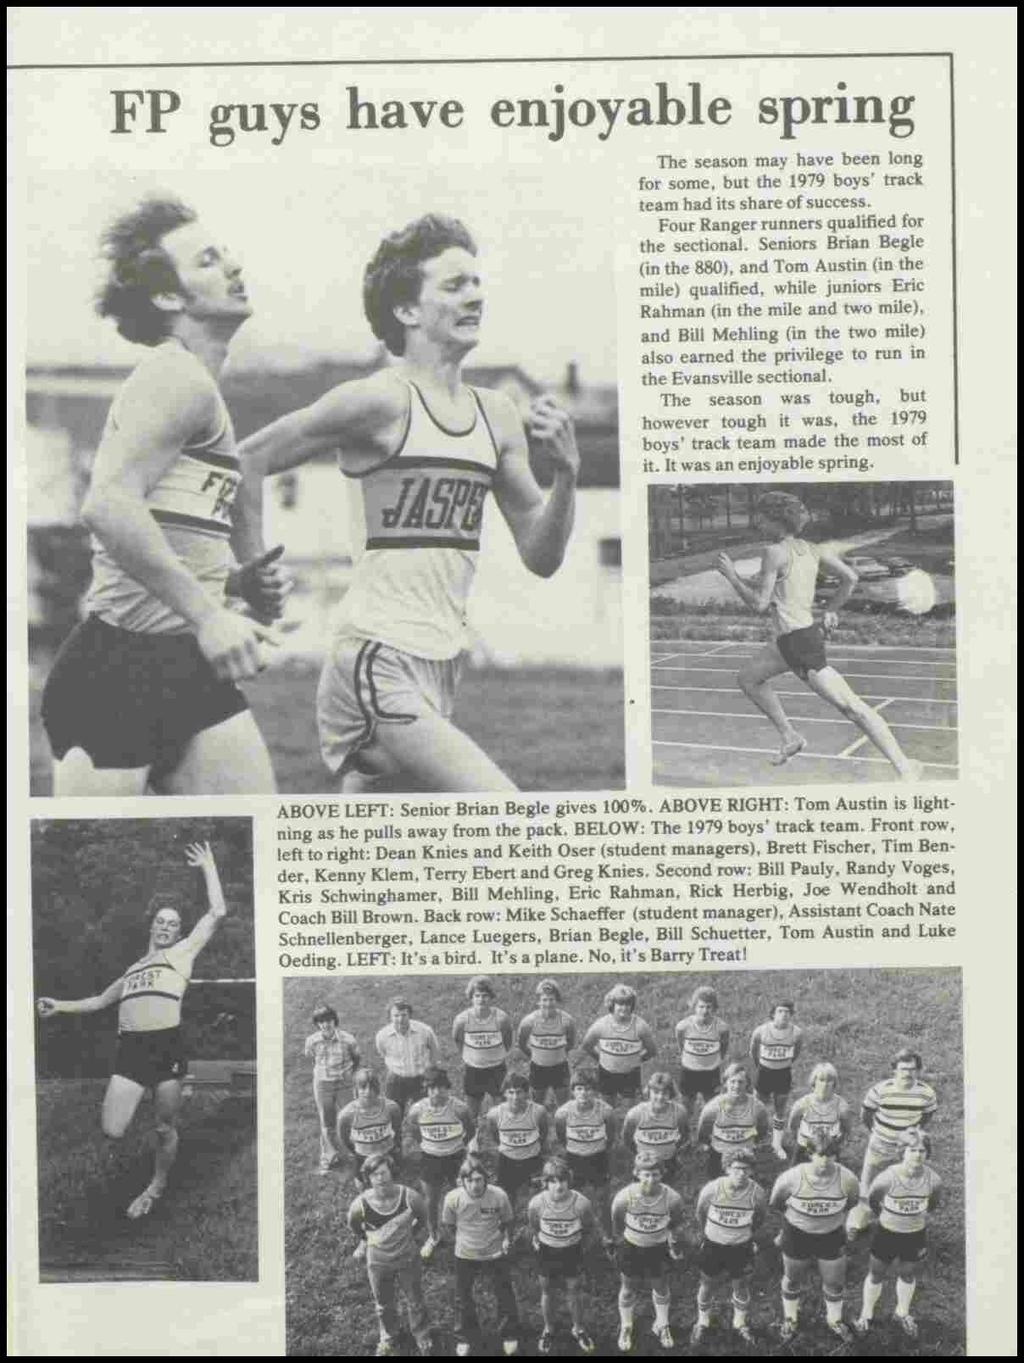 FP guys have enjoyable spring The season may have been long for some, but the 1979 boys' track team had its share of success. Four Ranger runners qualified for the sectional.